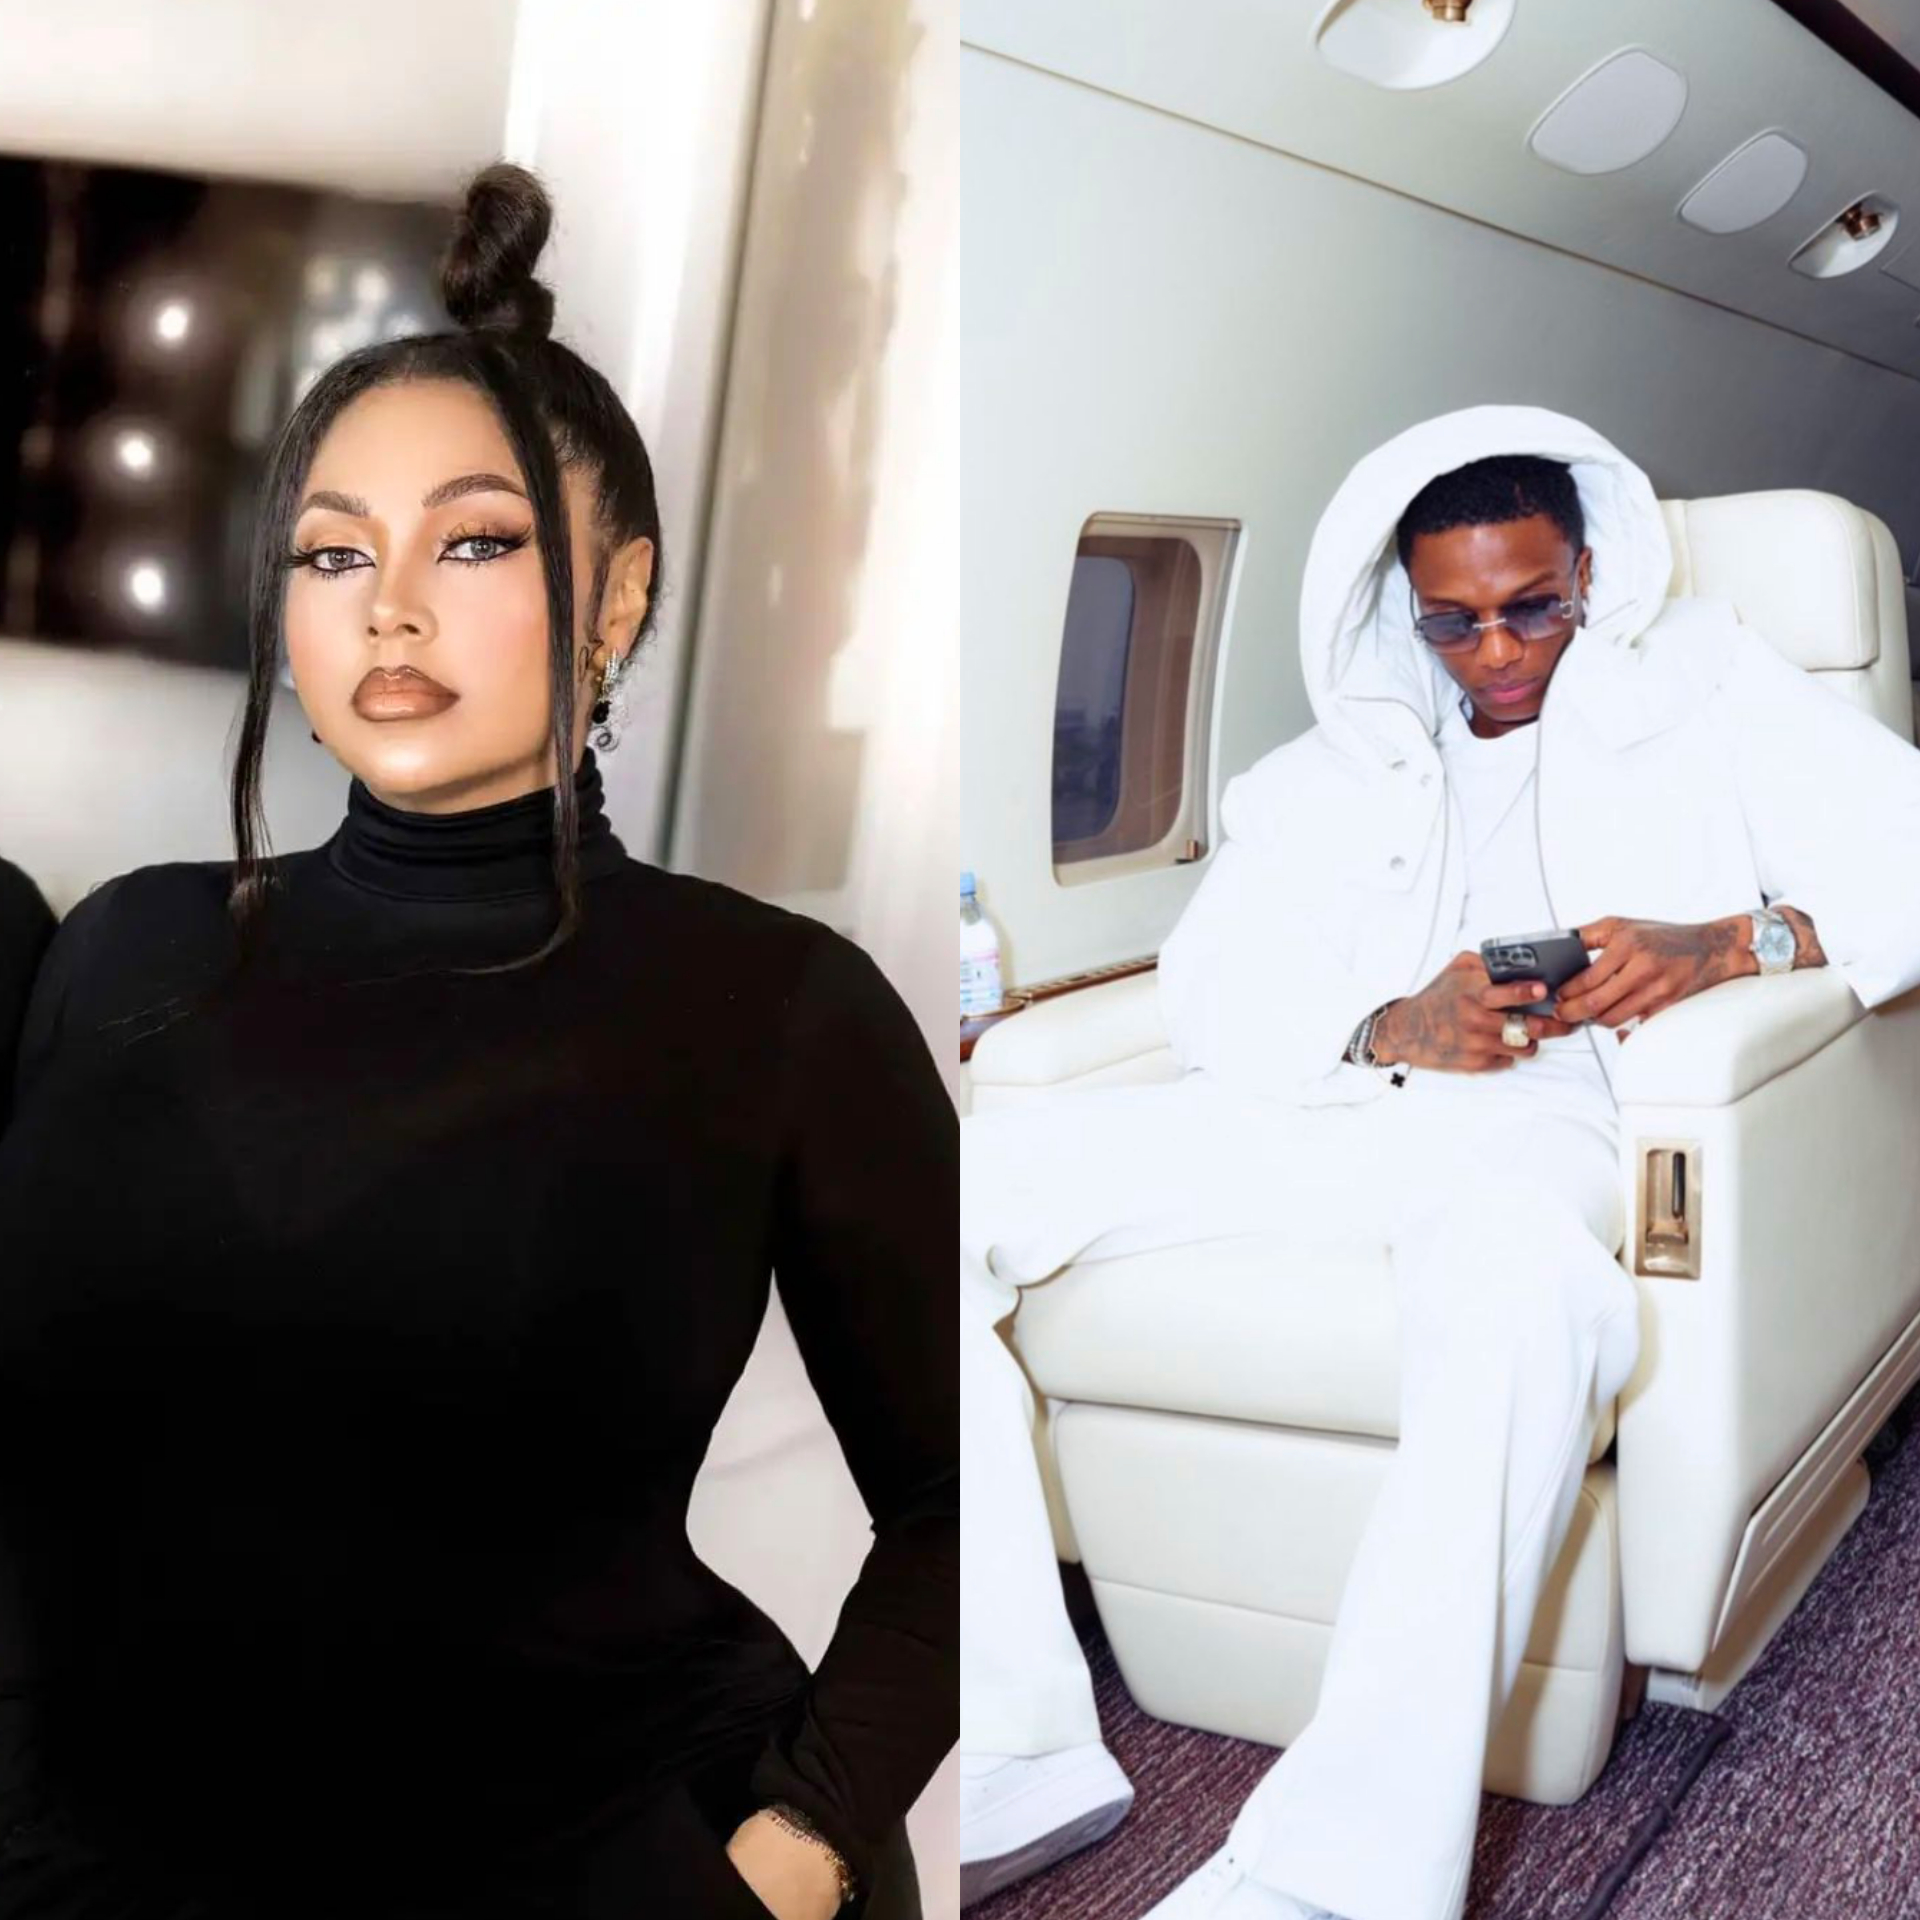 “There's Nothing Outside, Only Vultures" Singer Peter Okoye's Wife Warns Wizkid